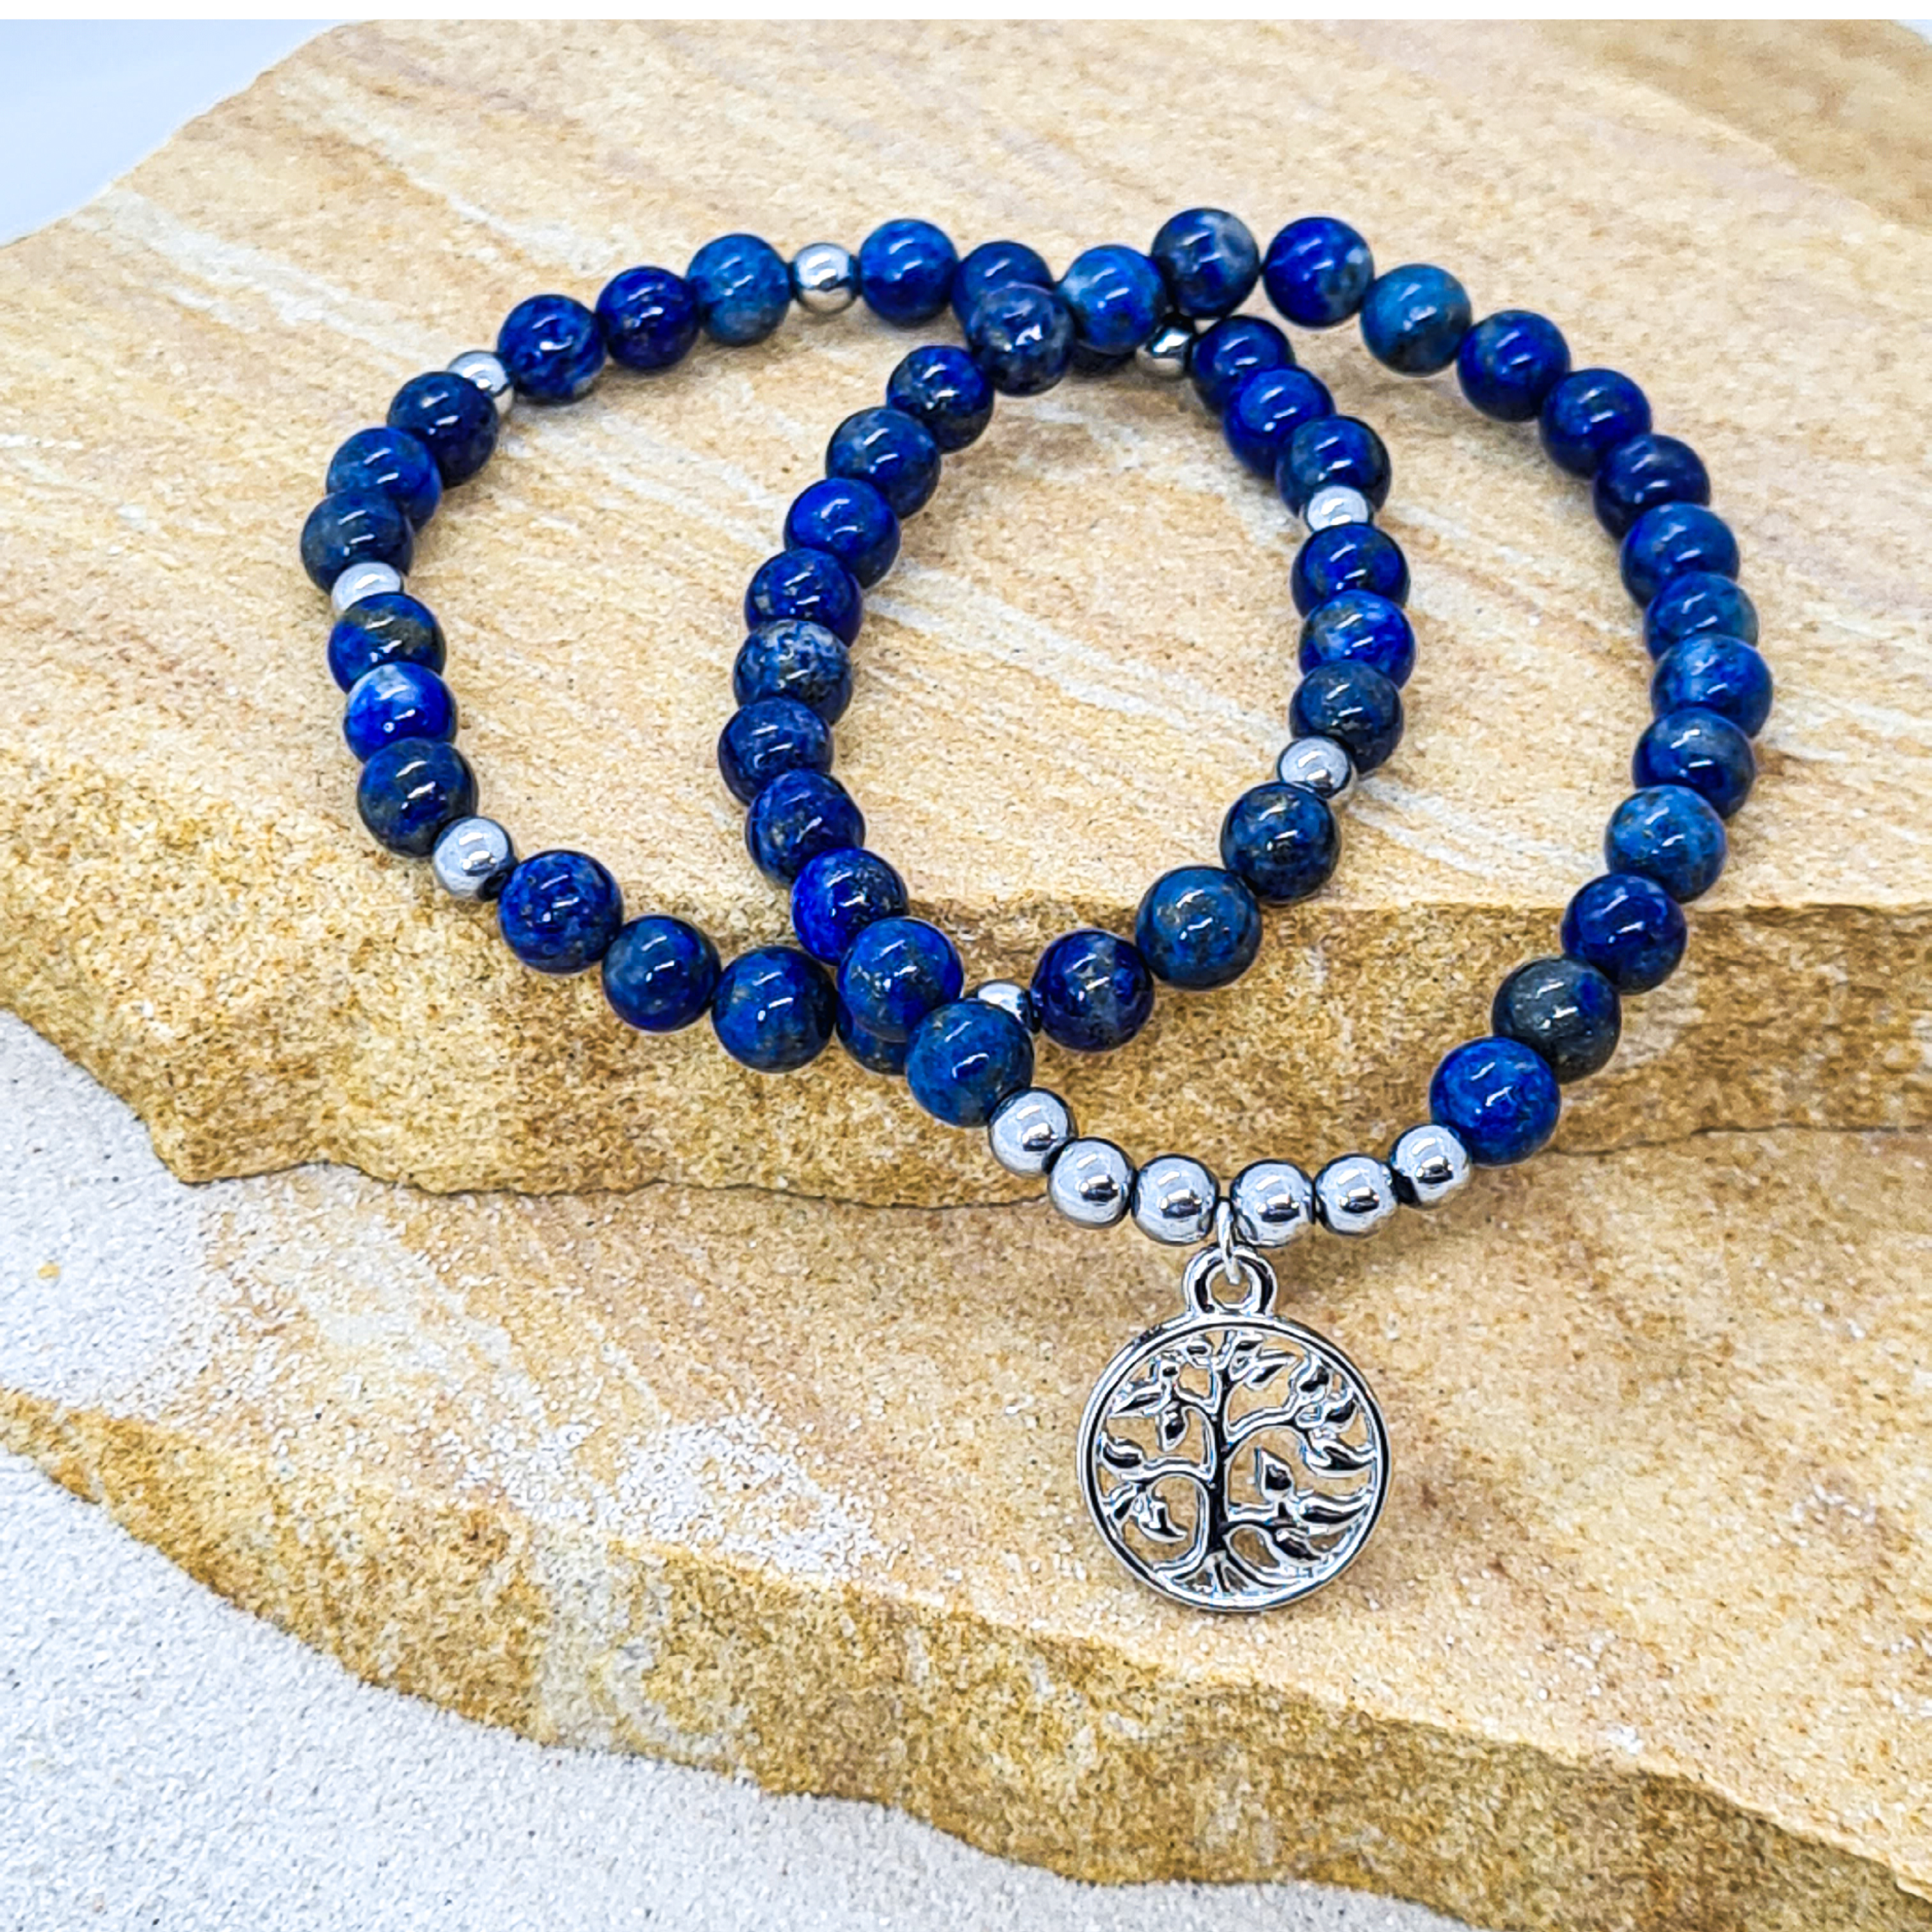 Lapis Lazuli 6mm crystal bead bracelet twin set with silver tree of life charm